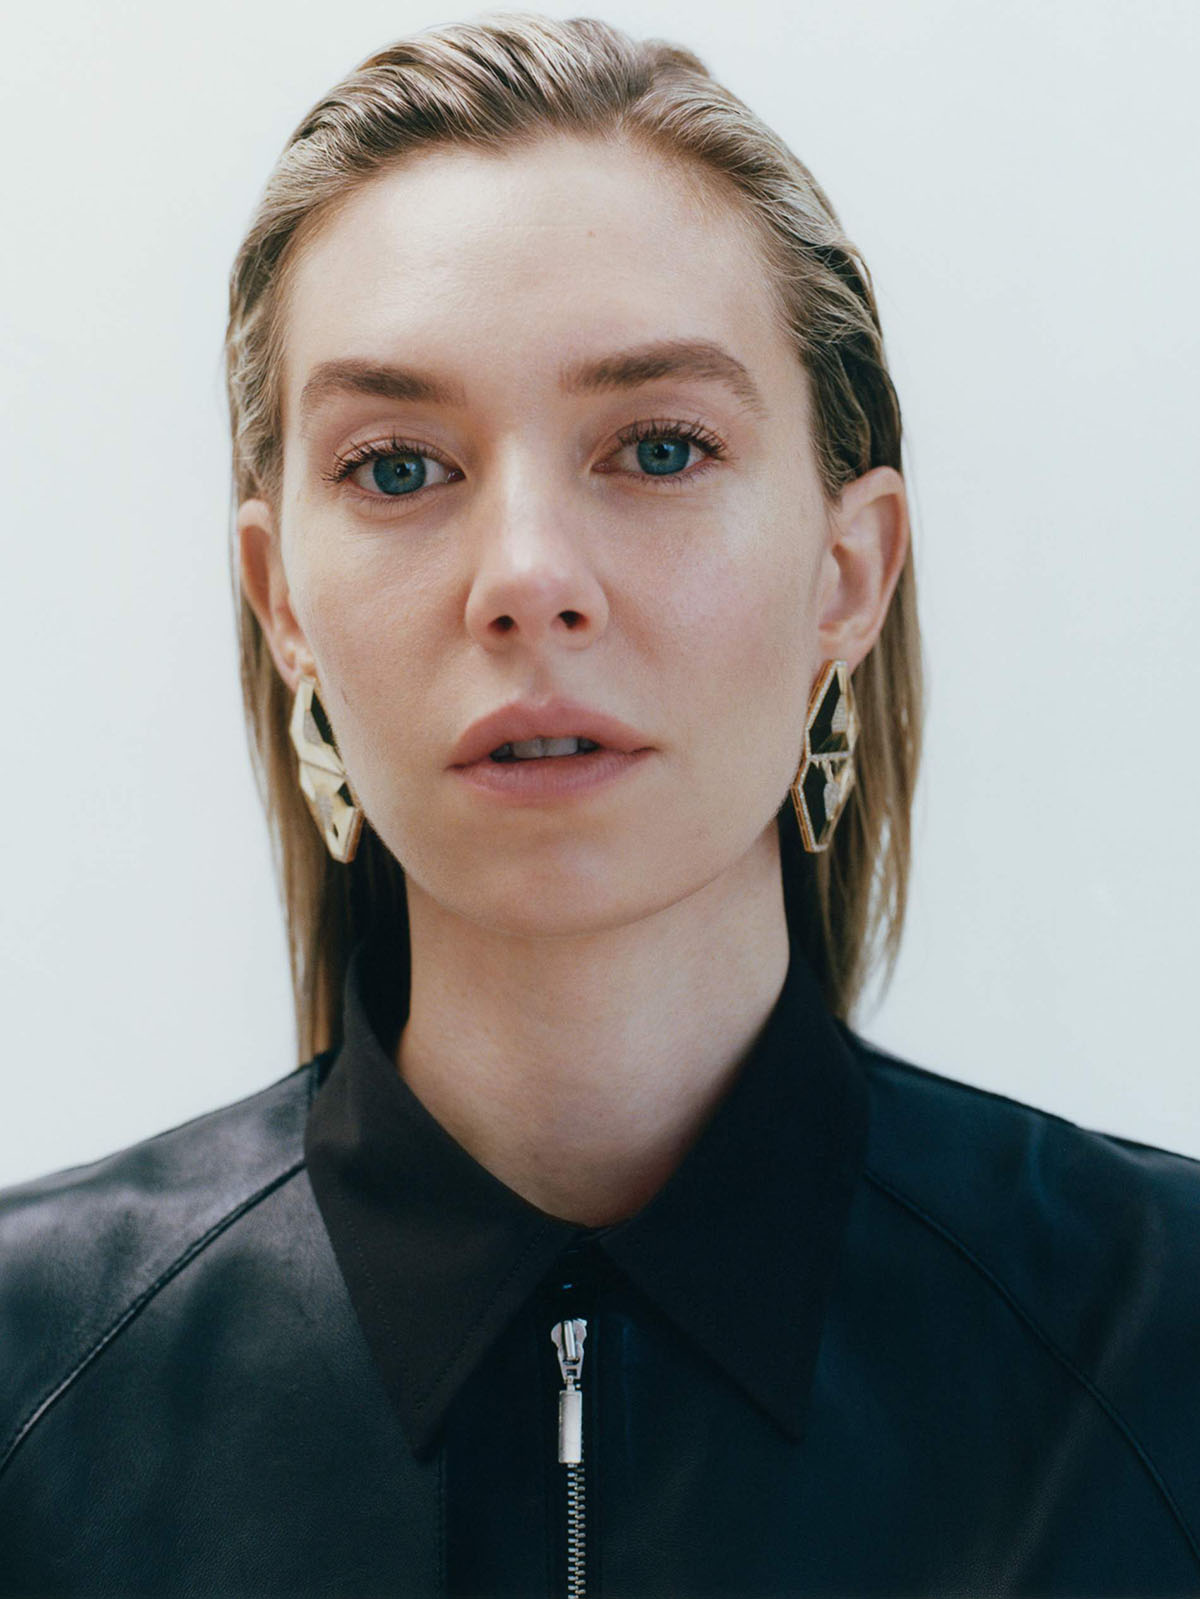 Vanessa Kirby covers Porter Magazine April 5th, 2021 by Toby Coulson